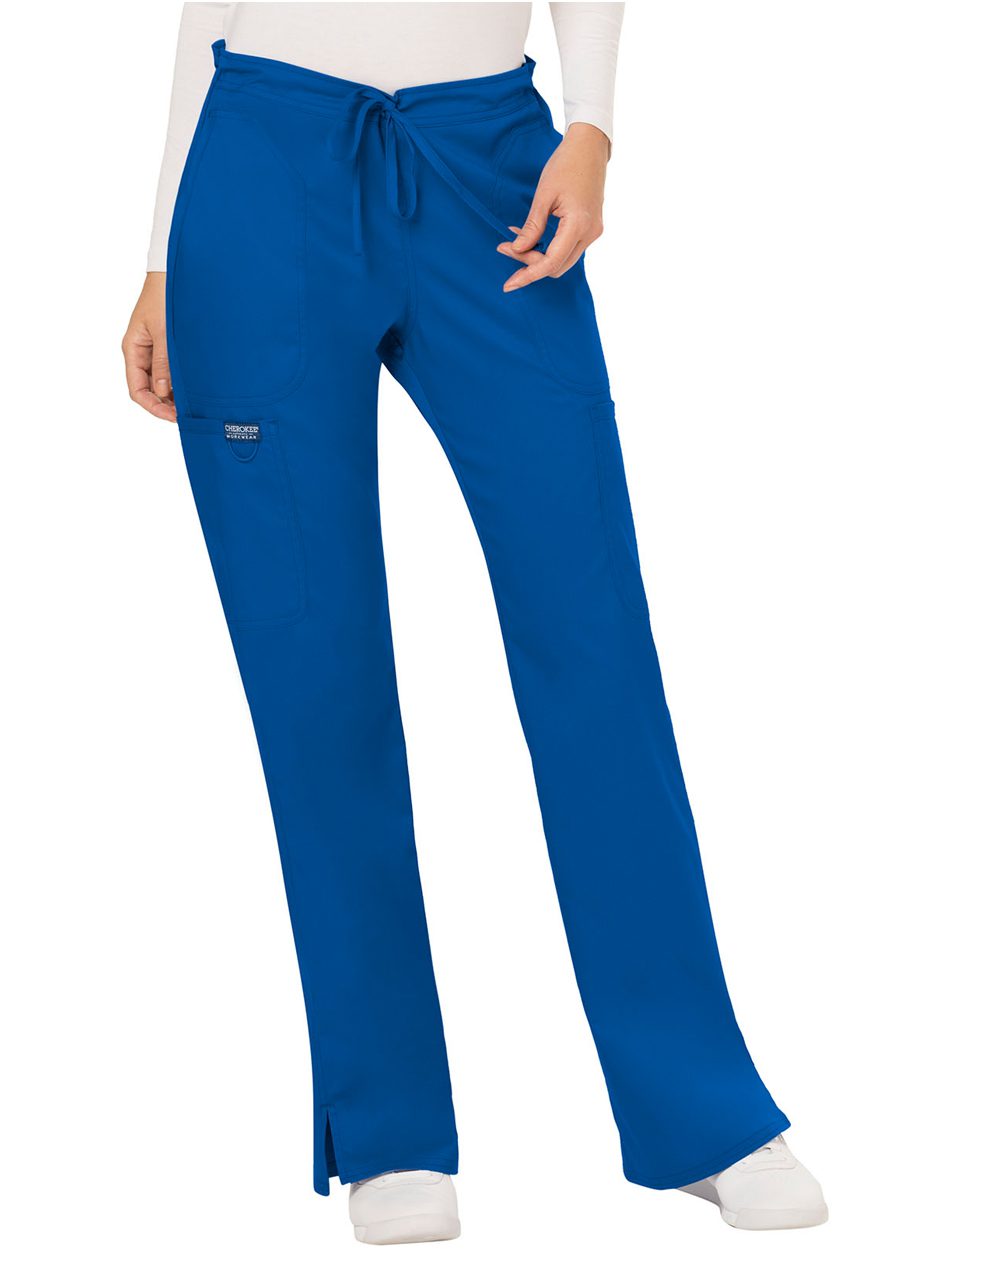 Mid Rise Moderate Flare Drawstring Pant in Regular